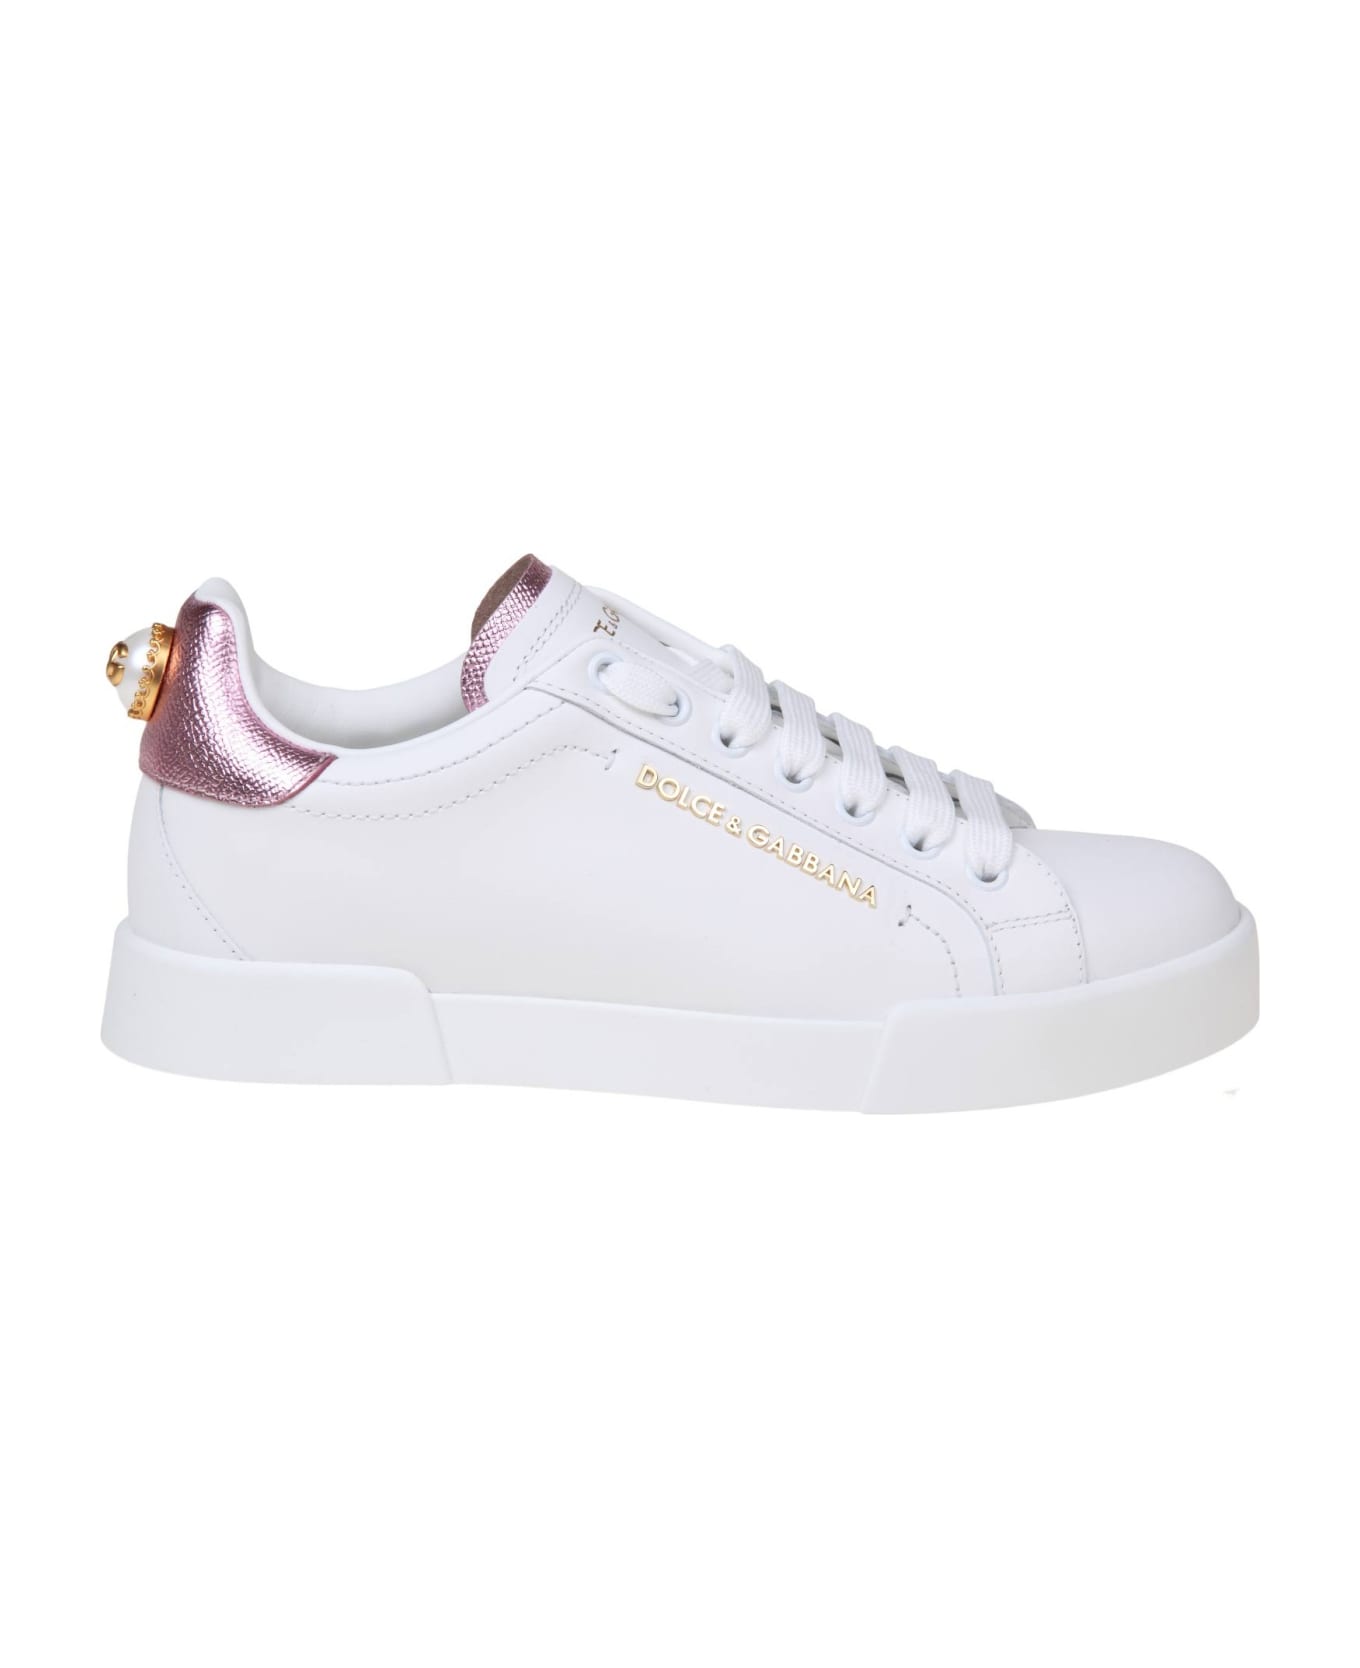 Dolce & Gabbana Portofino Sneakers In White Leather With Logo Pearl - WHITE/PINK